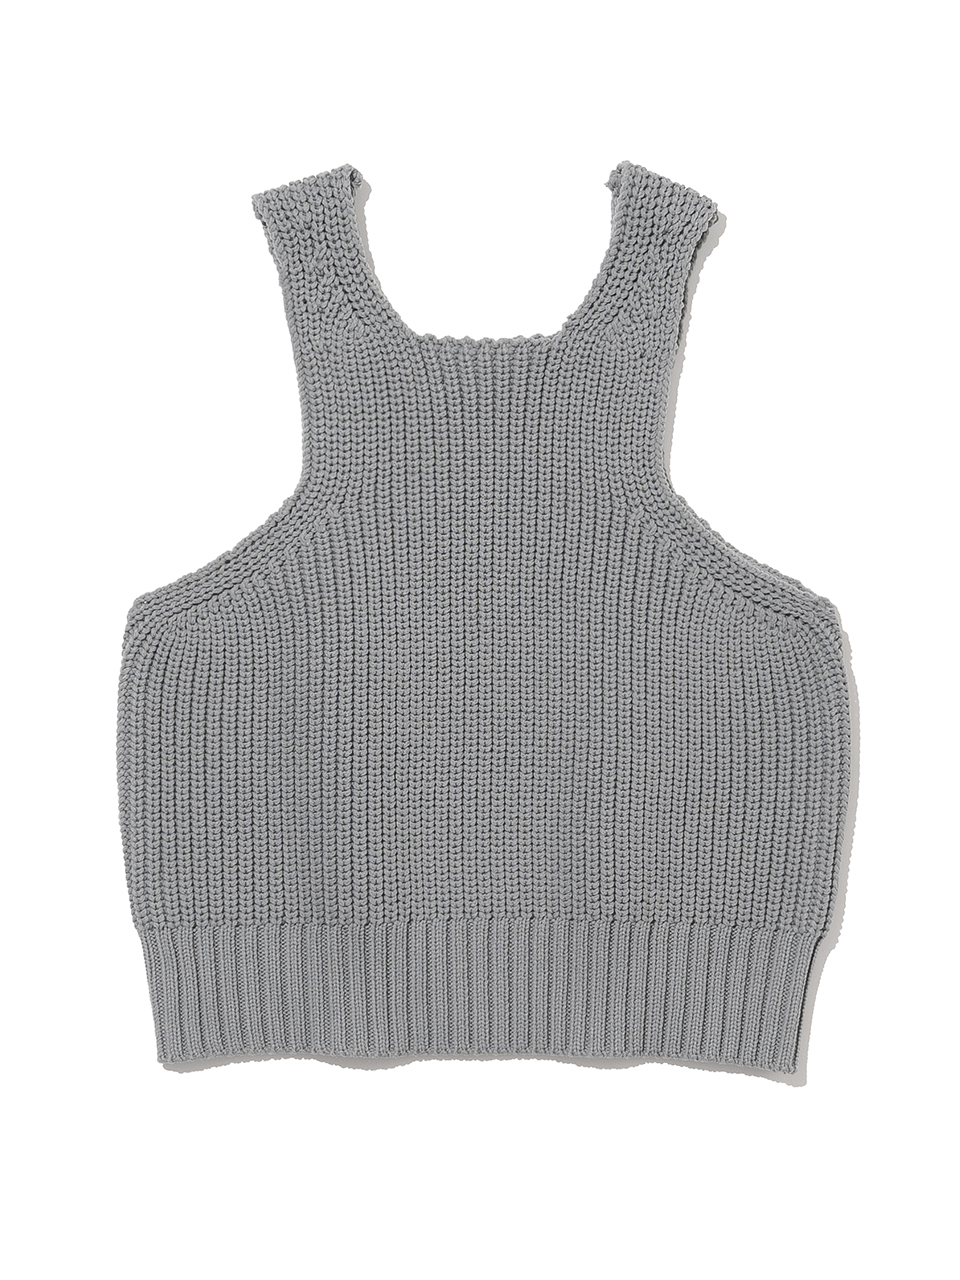 Racer Bold Knit Top [Gray]